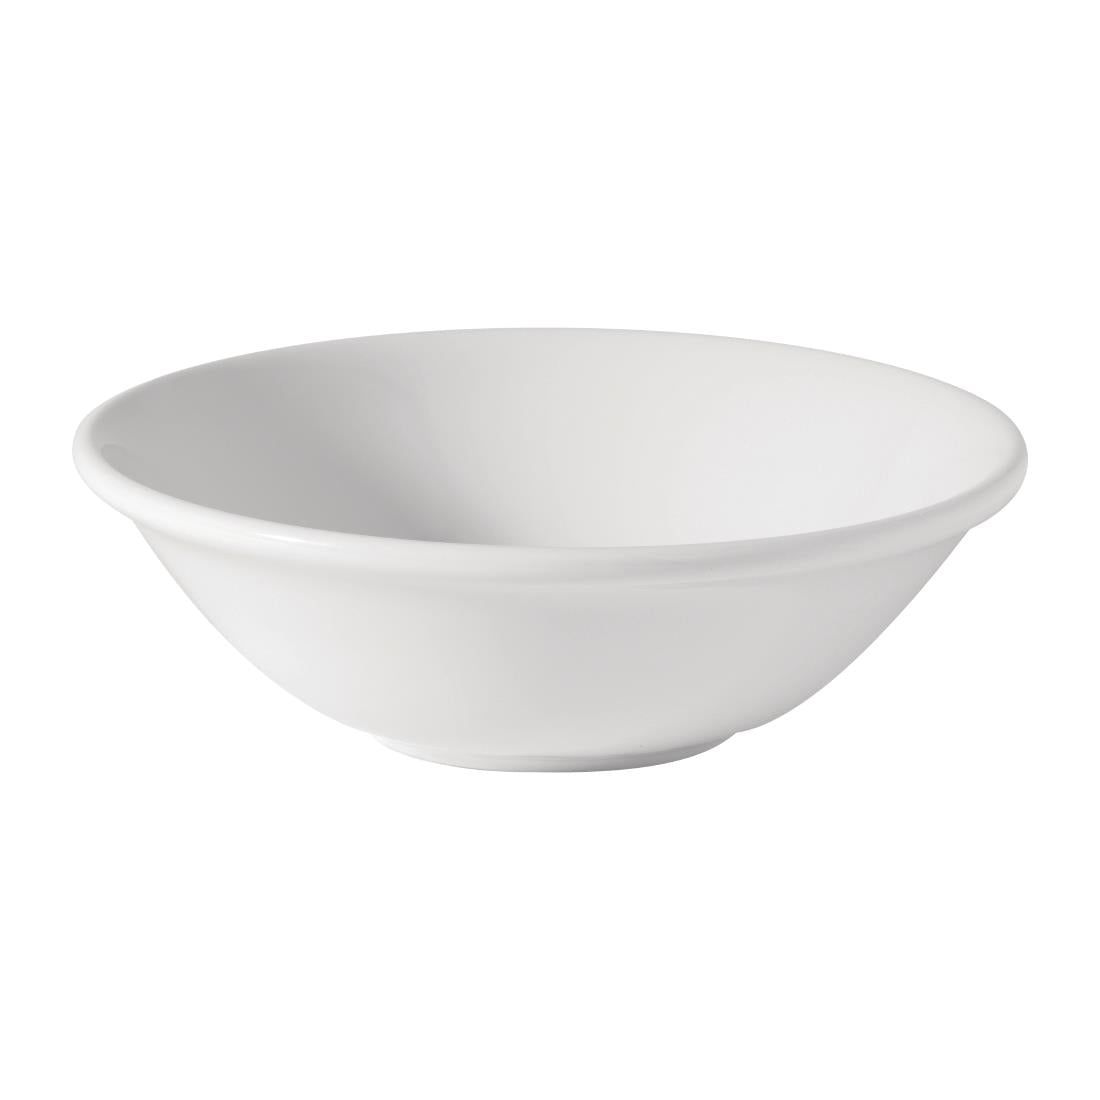 CW299 Utopia Titan Oatmeal Bowls White 160mm (Pack of 36) JD Catering Equipment Solutions Ltd